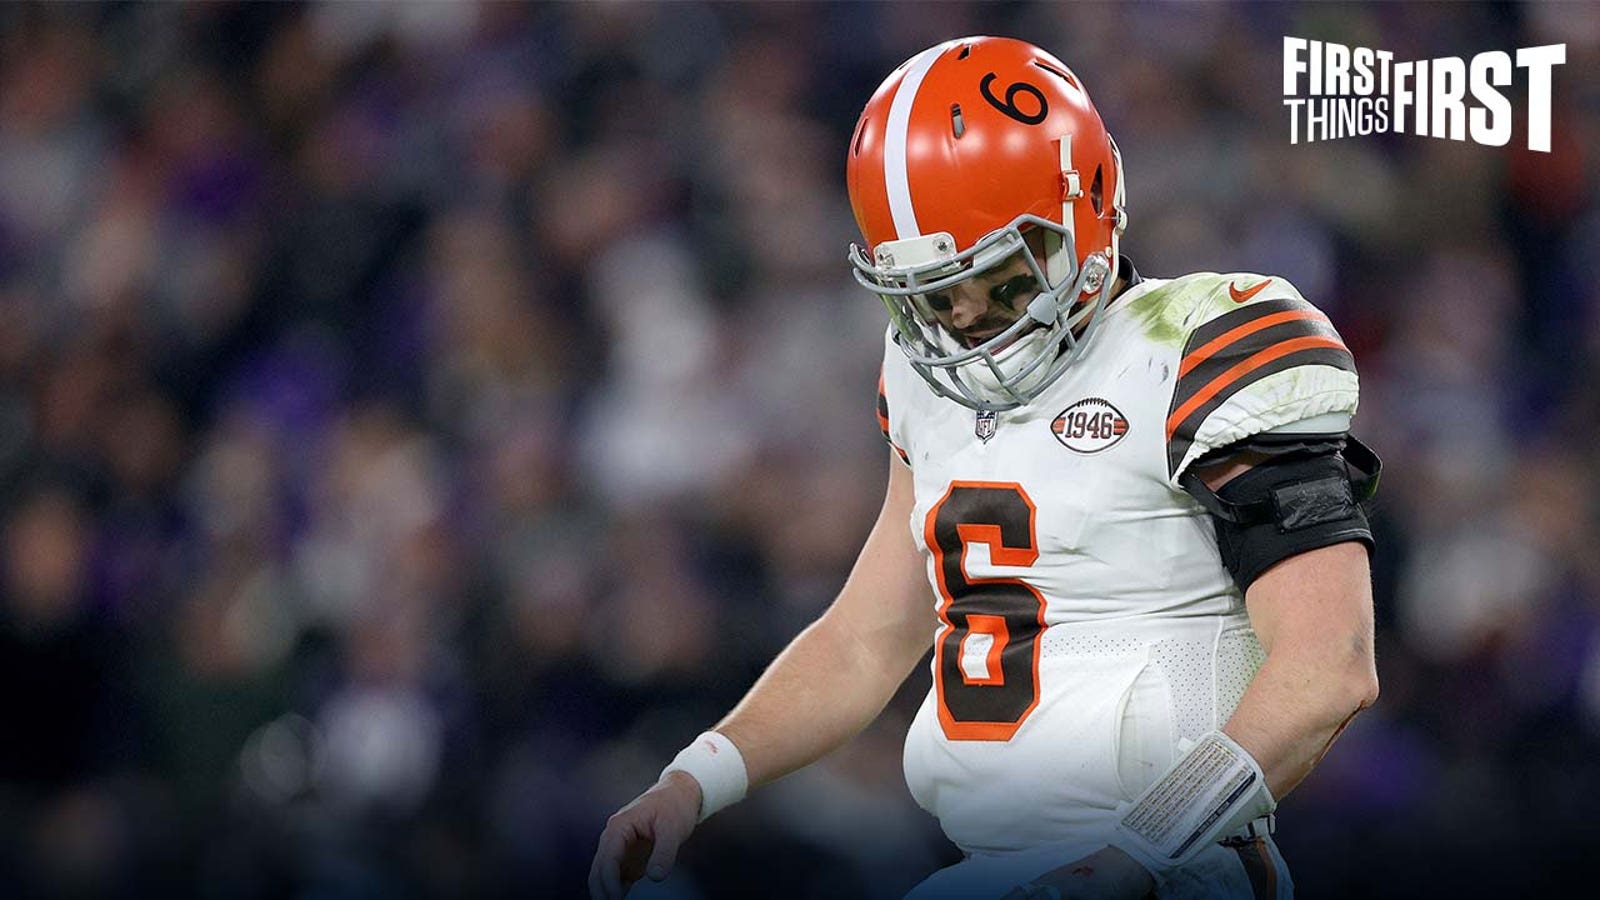 Chris Broussard: Browns are right to stick with Baker Mayfield I FIRST THINGS FIRST